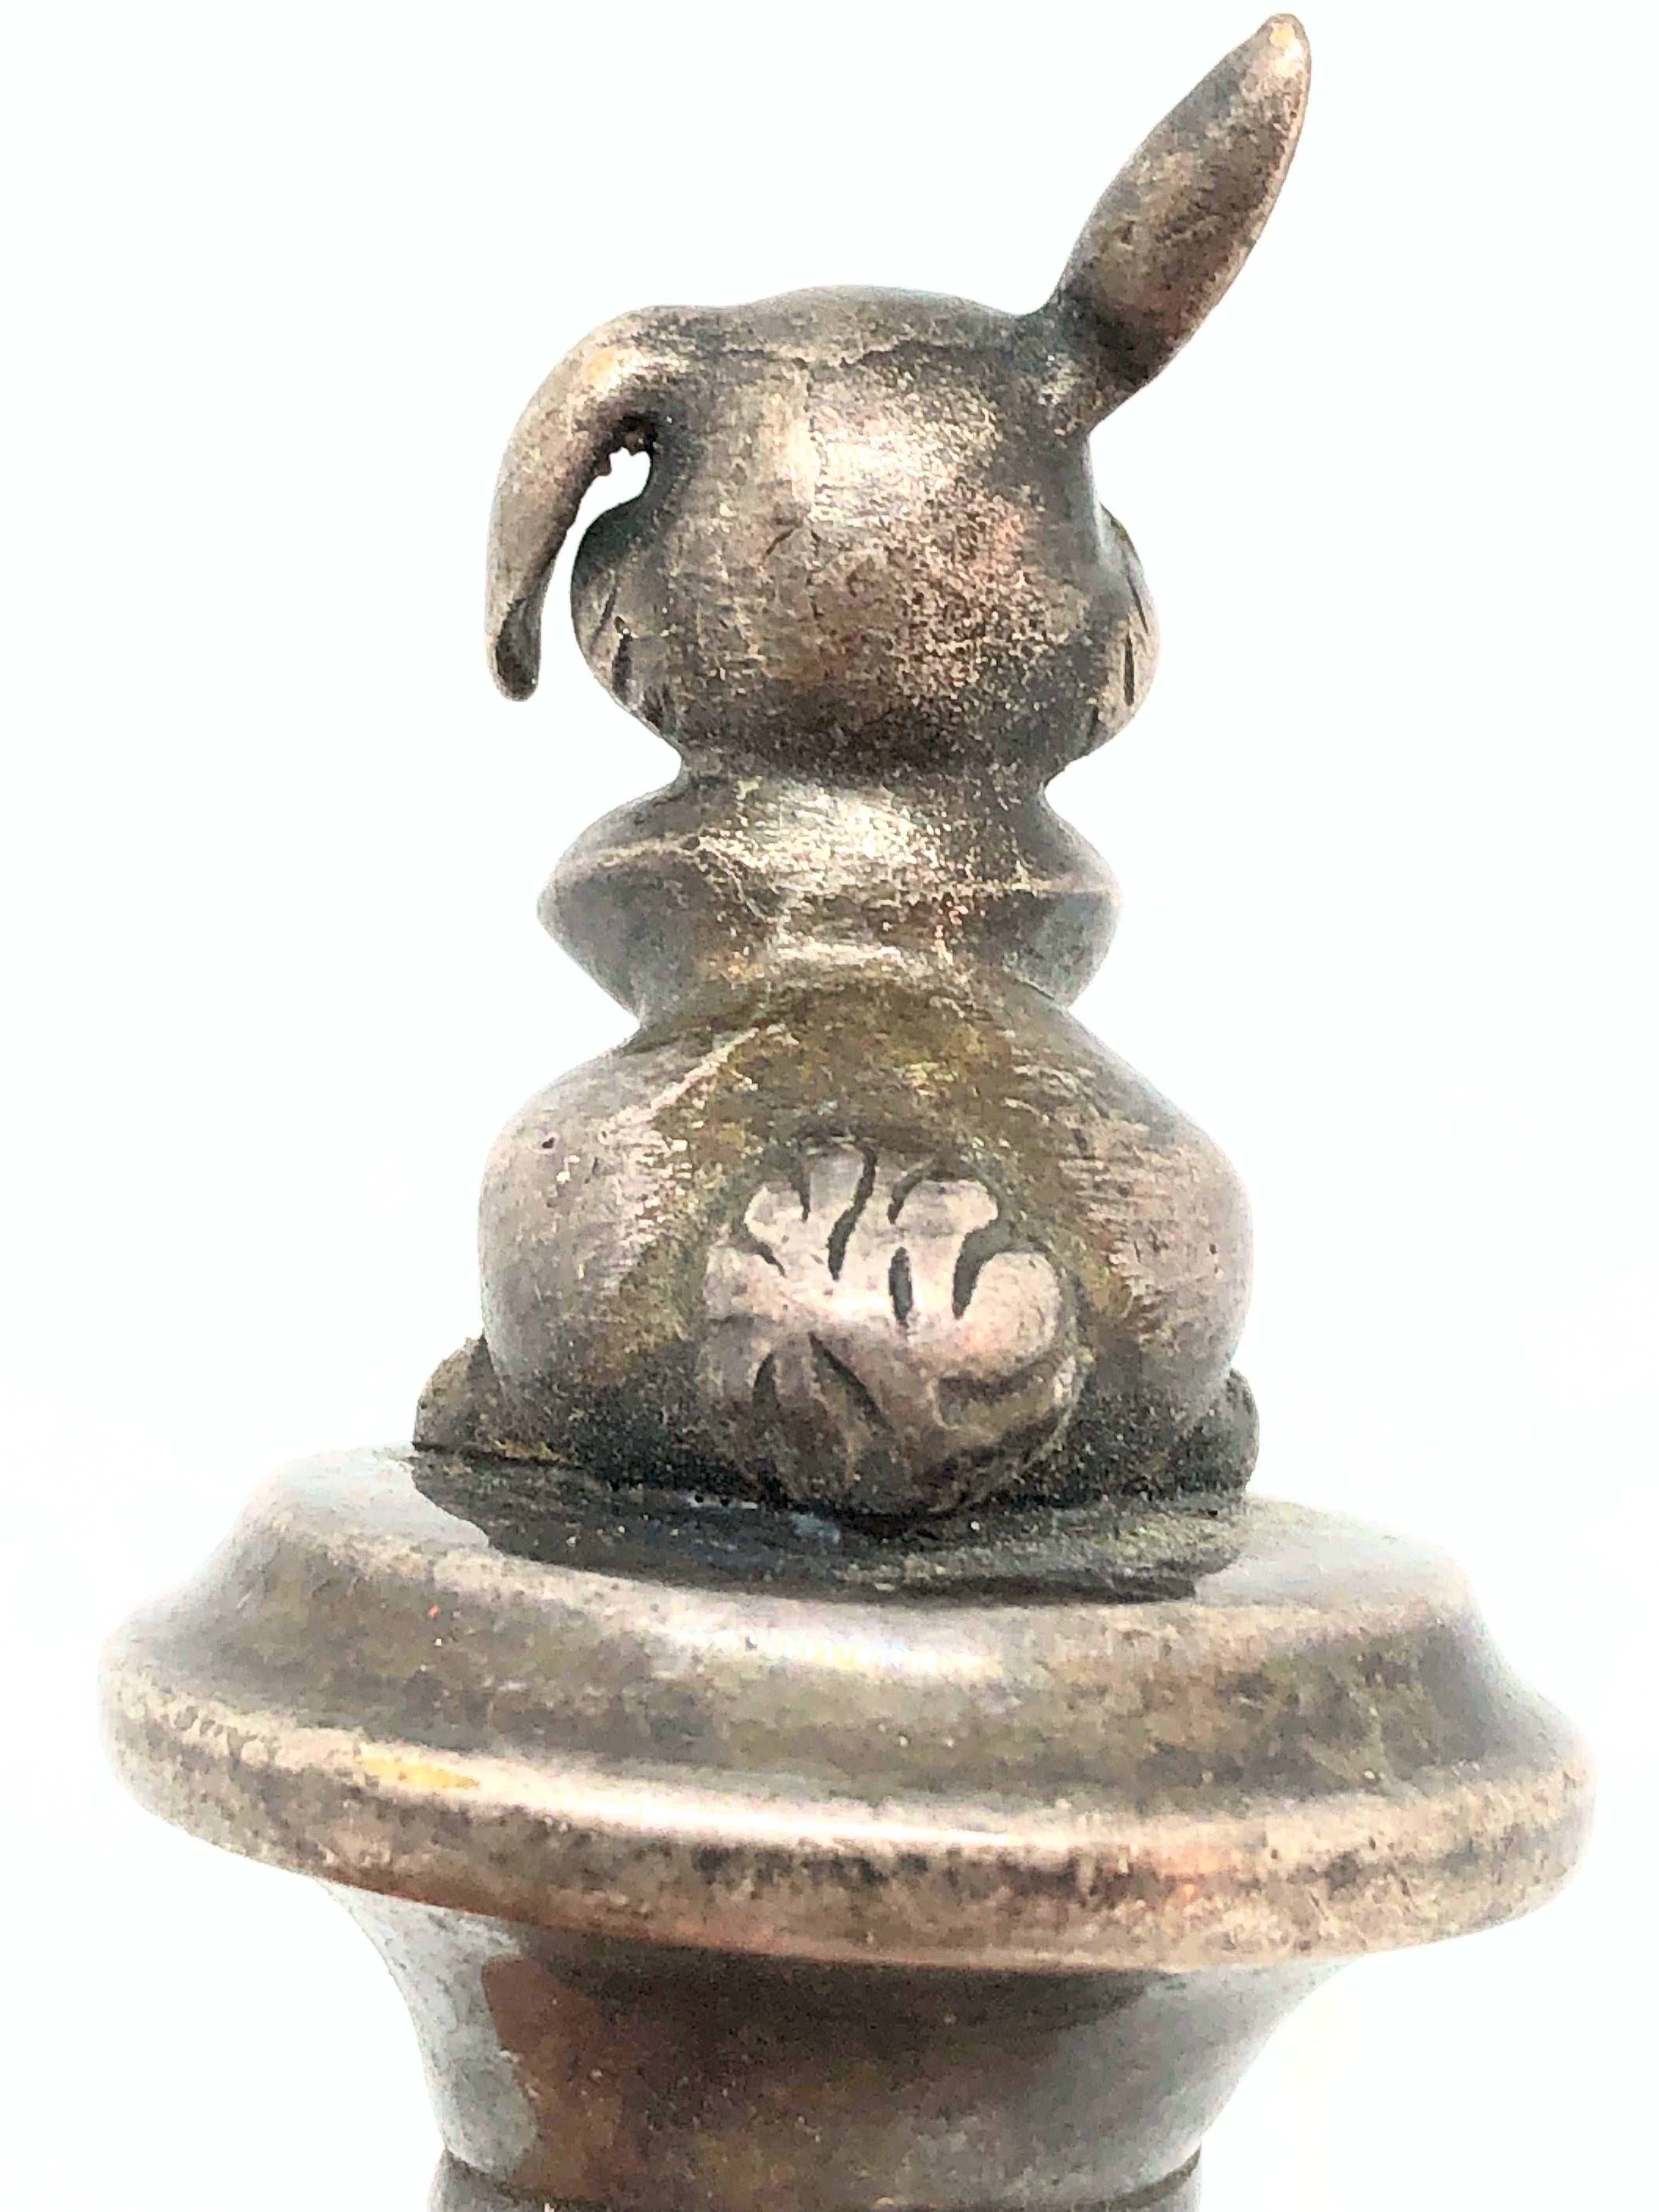 A beautiful metal and cork bottle stopper. Some wear with a nice patina, but this is old-age. Made of metal and cork. A beautiful nice Barware item or just a display item in your collections of antique bottle stoppers.

      